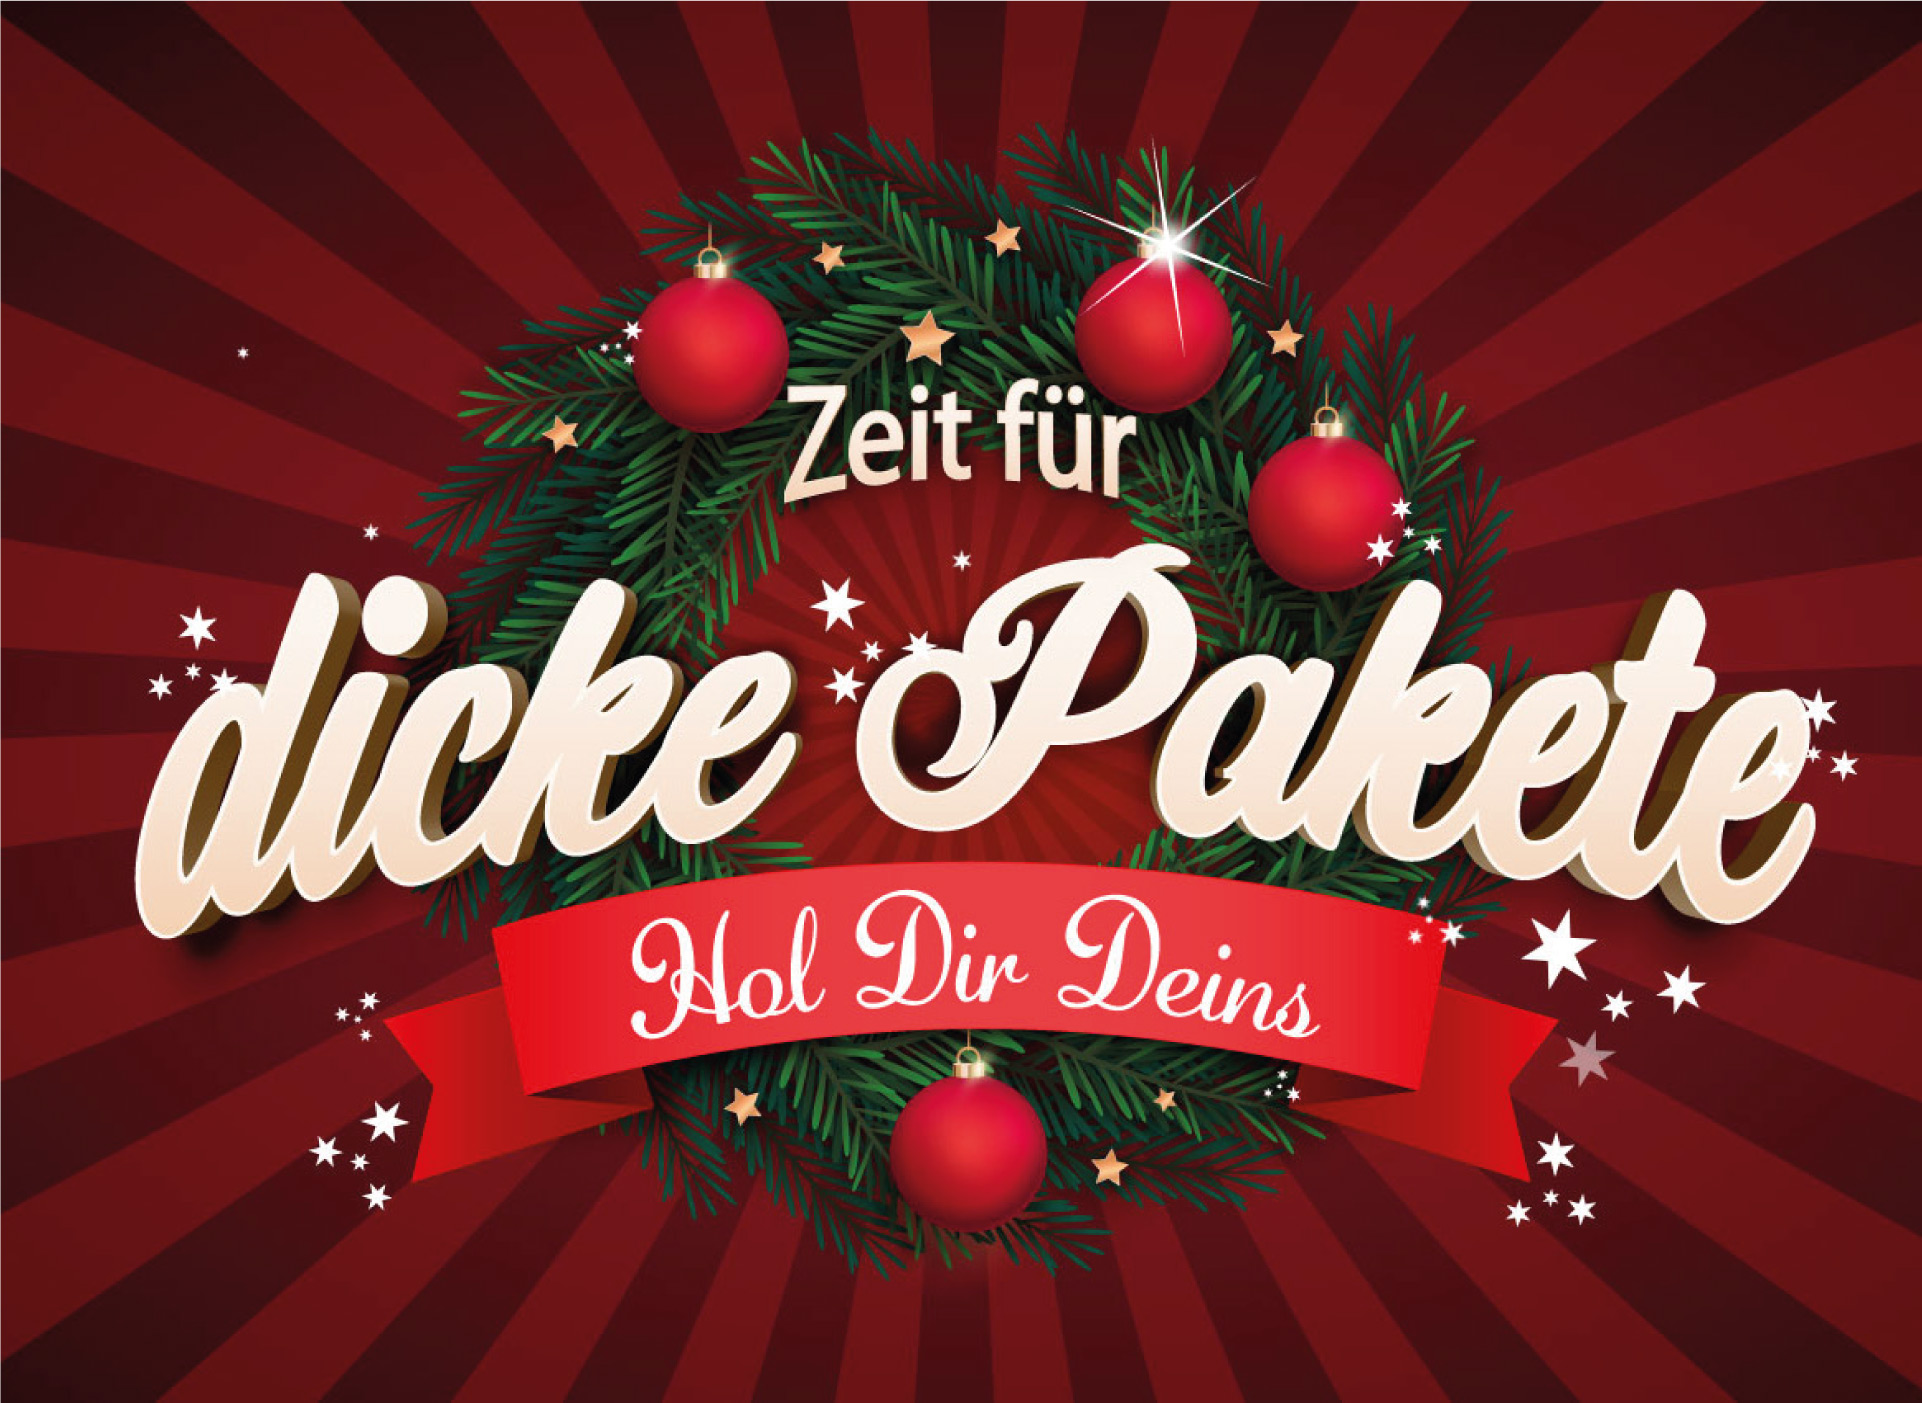 New Horizons - Weihnachts-Special